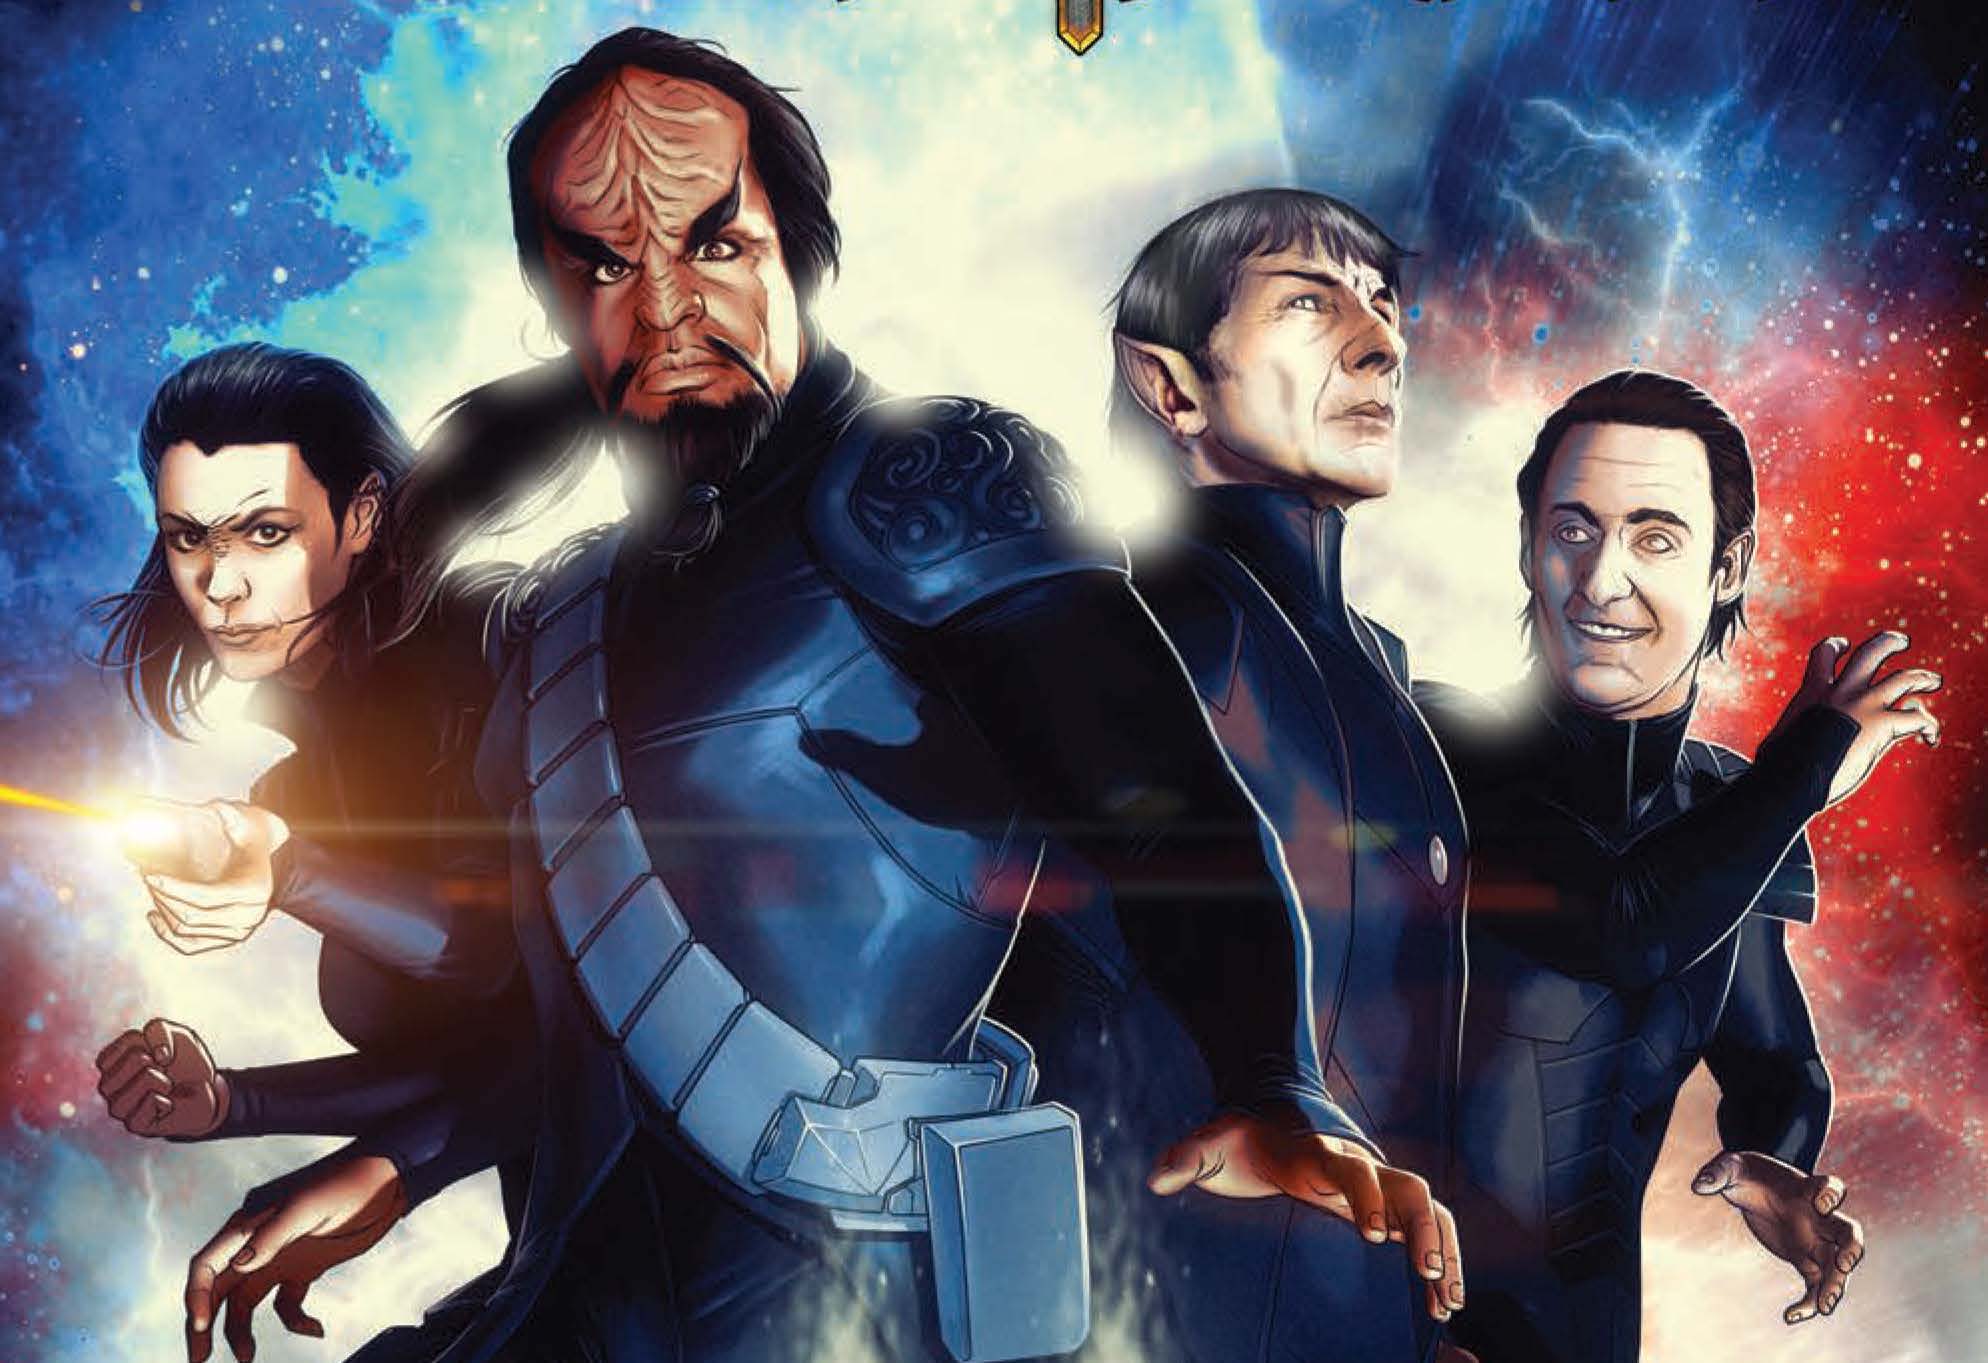 ‘Star Trek: Defiant’ #1 sets up an eclectic crew captained by Worf